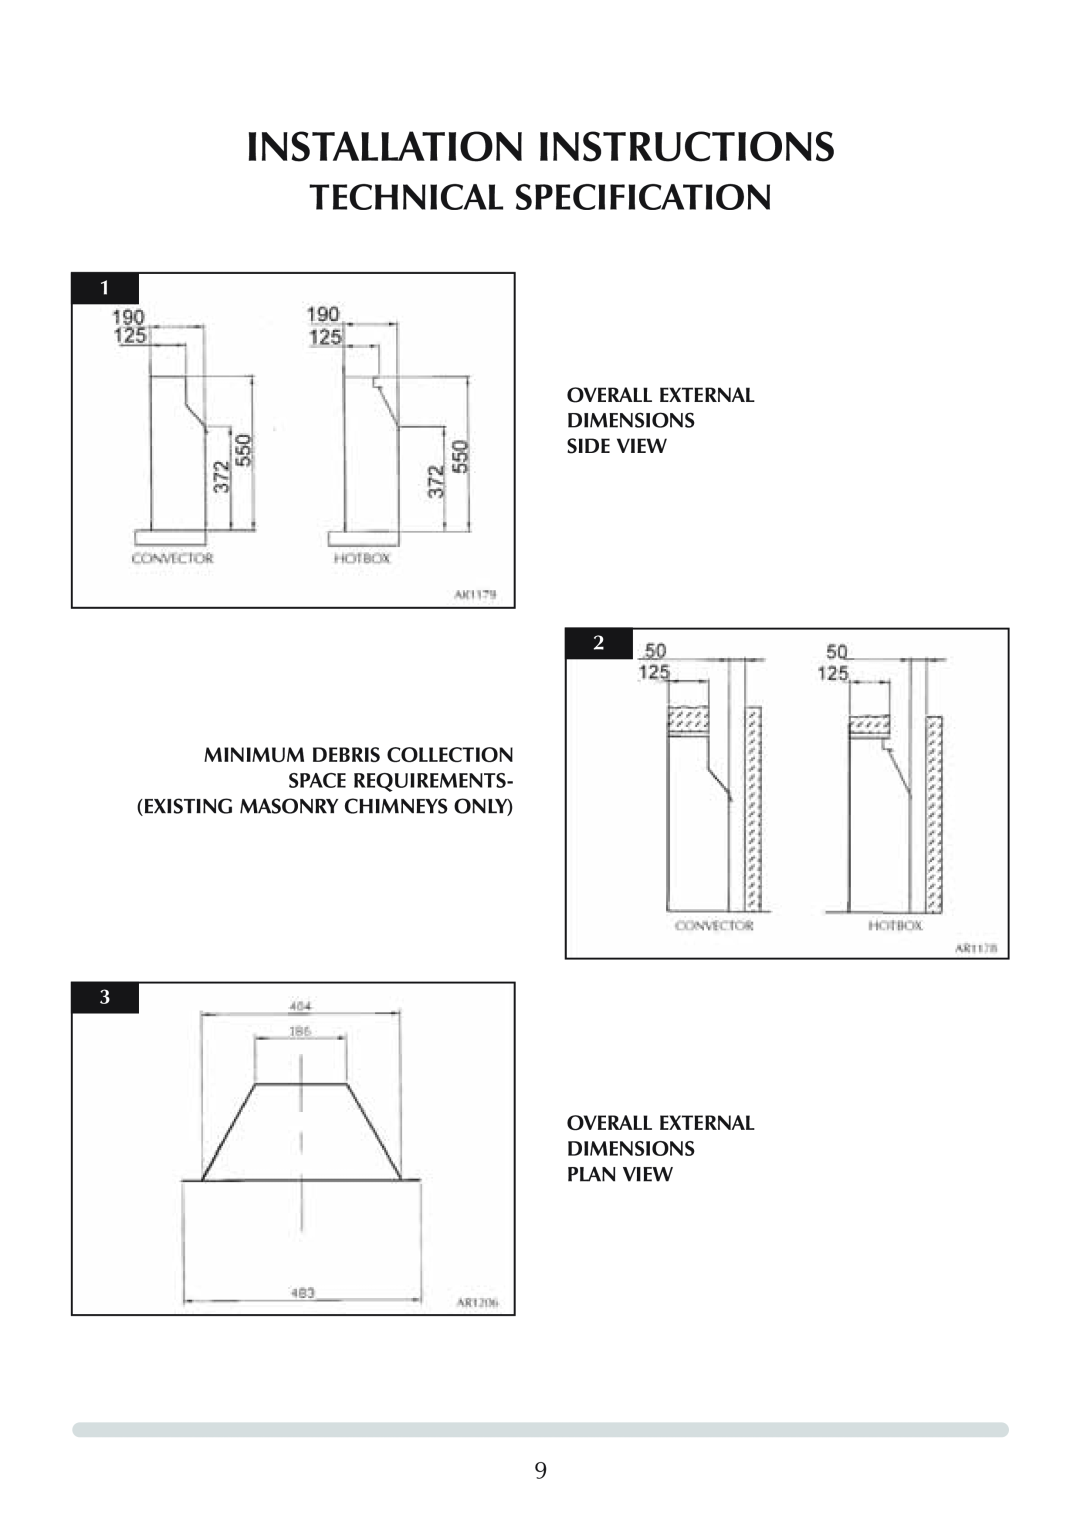 Stovax Logic Hotbox & Convector Fire manual Installation Instructions, Technical Specification 